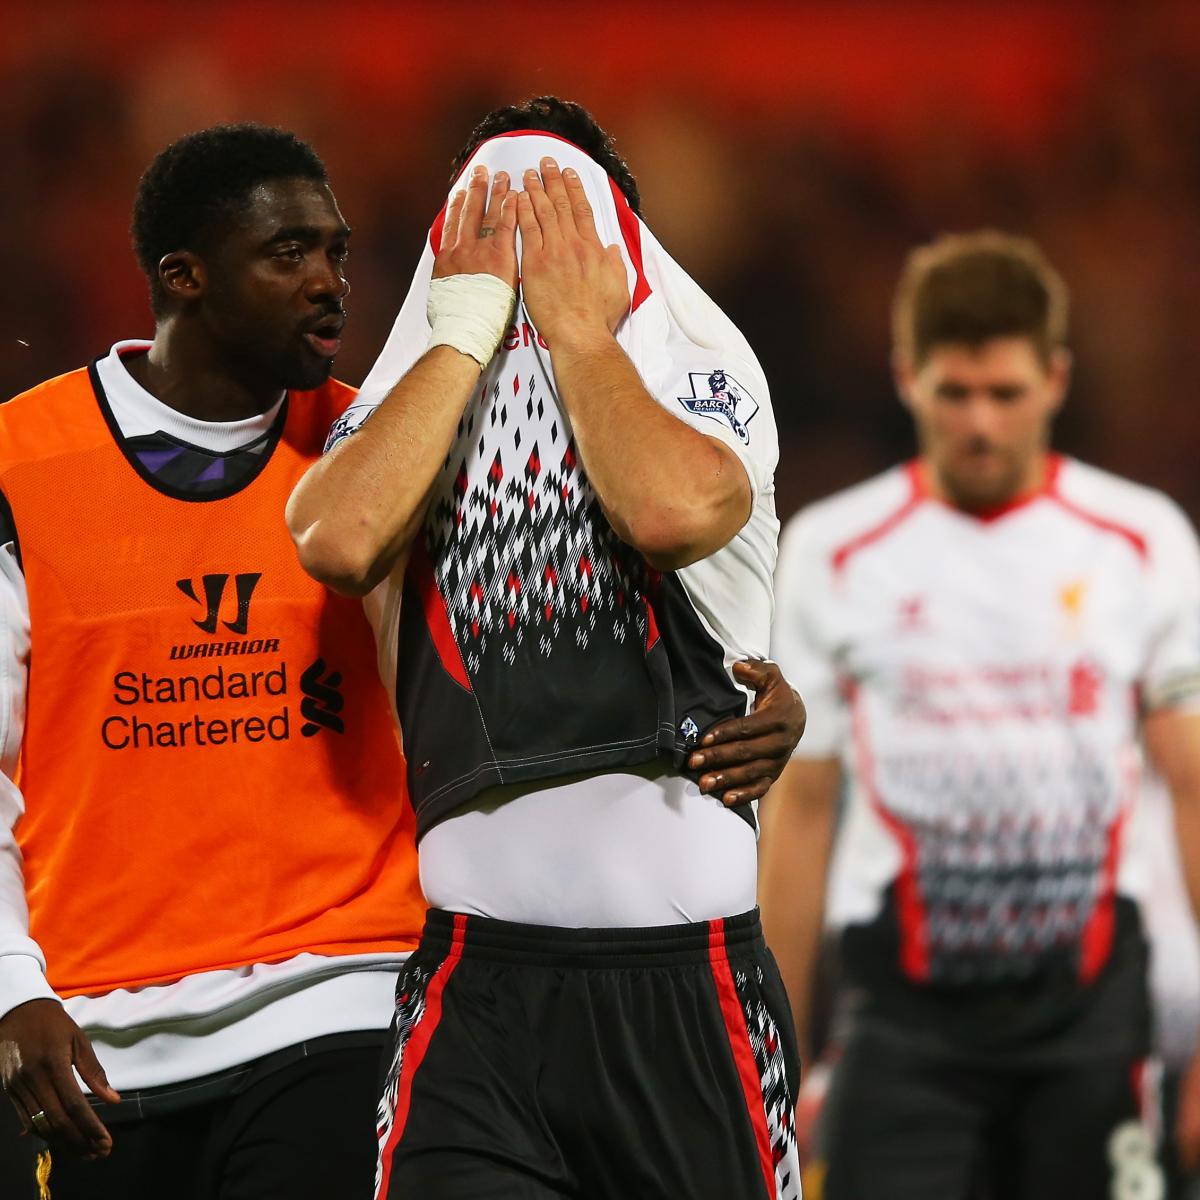 Liverpool's Gay Pride Curse and the 10 Strangest Curses in Football